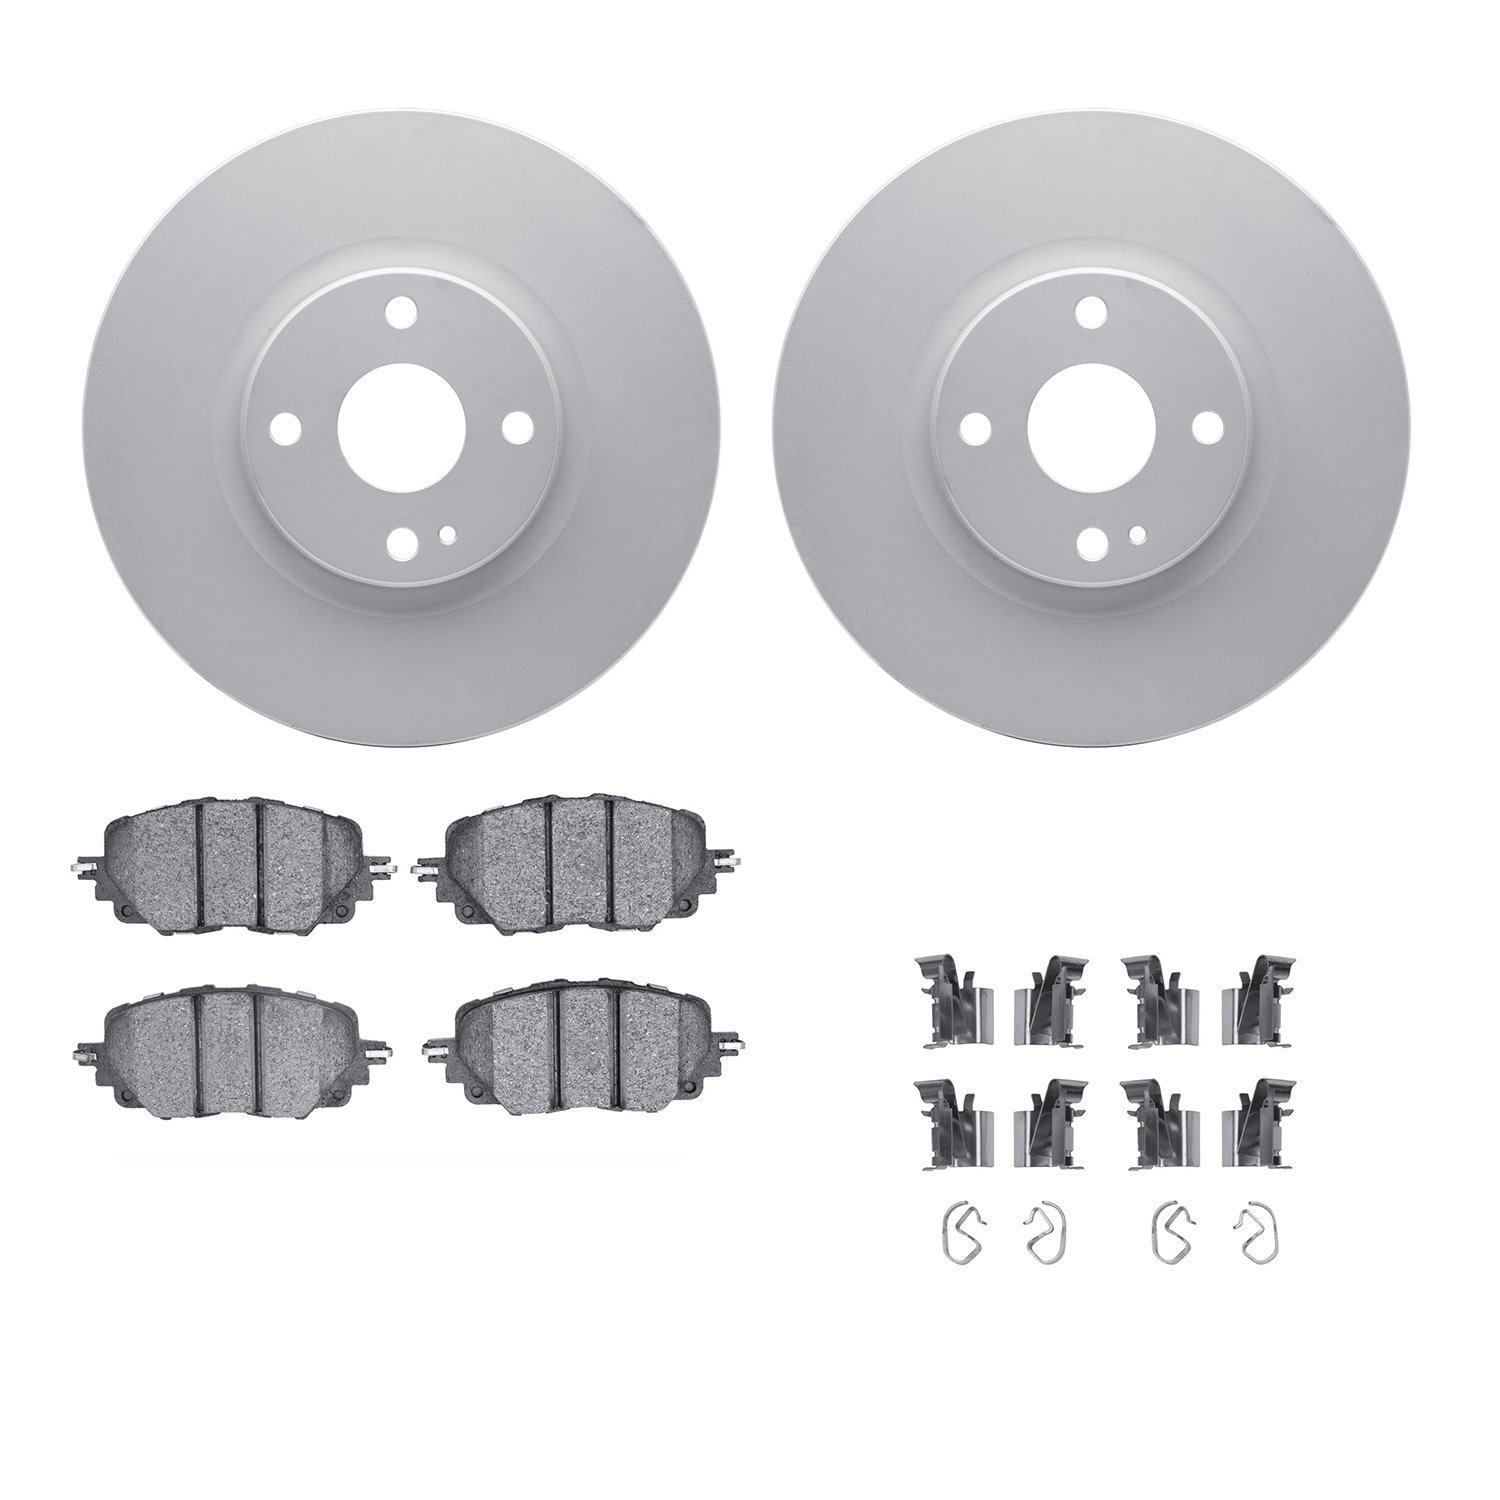 4312-80045 Geospec Brake Rotors with 3000-Series Ceramic Brake Pads & Hardware, Fits Select Multiple Makes/Models, Position: Fro